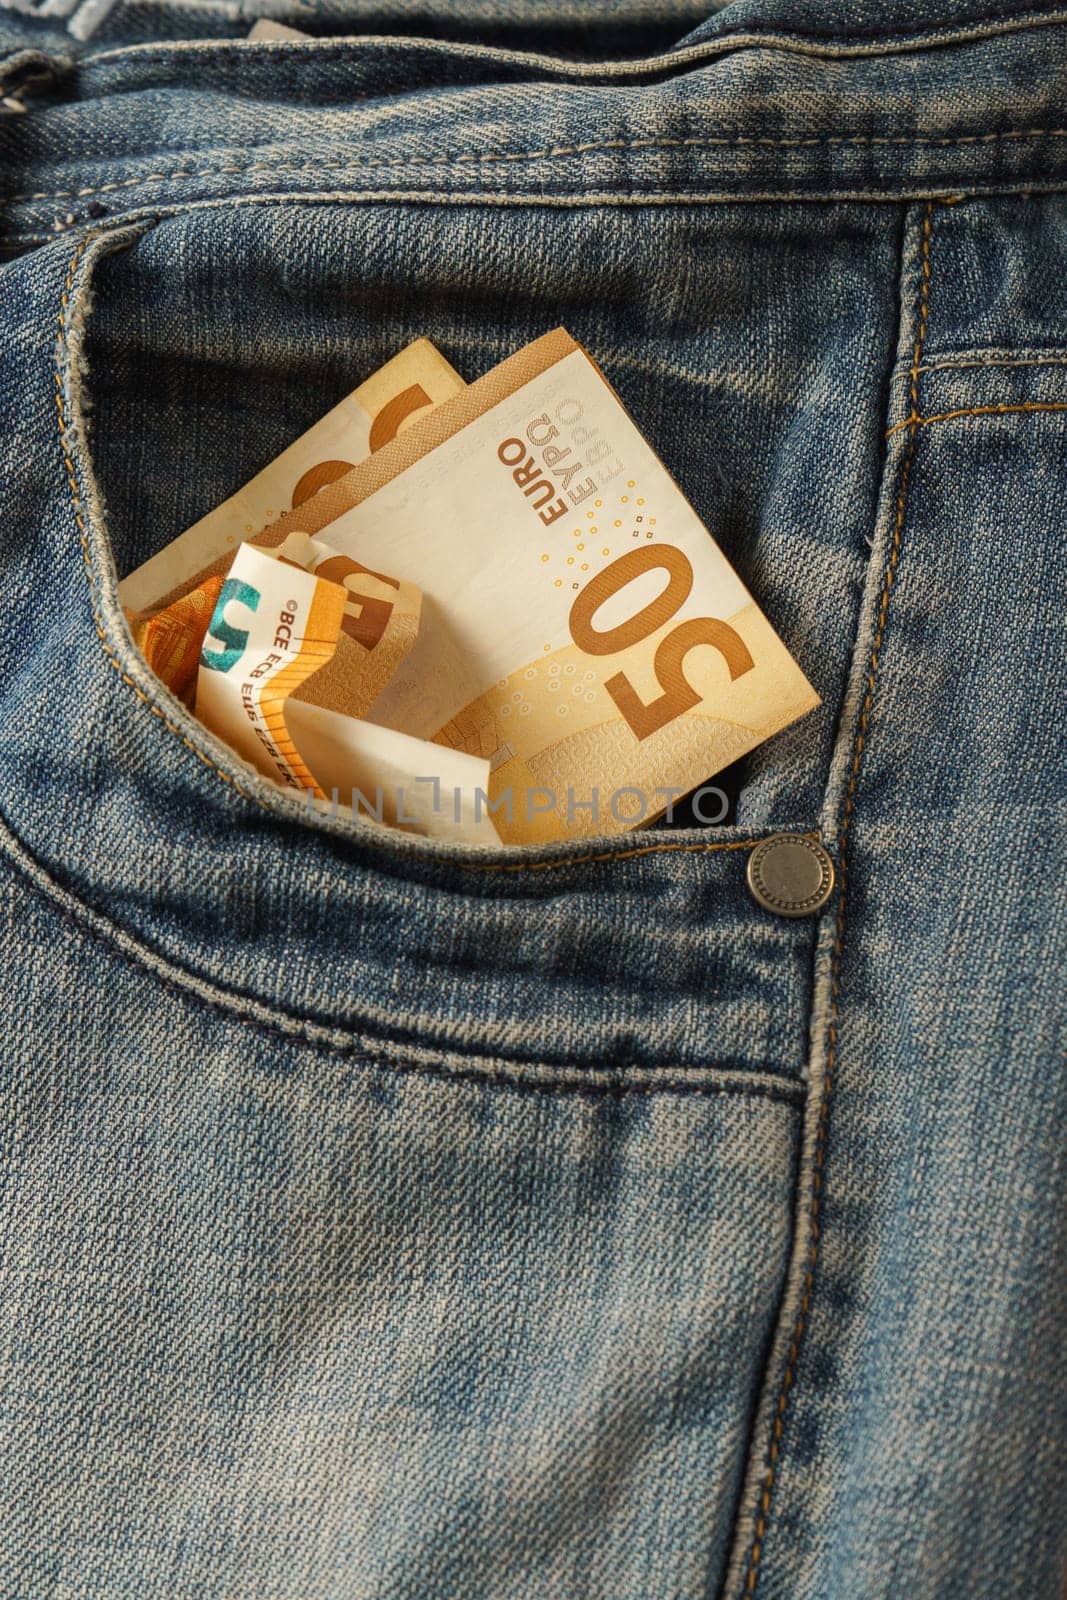 euro bills coming out of a jeans pocket